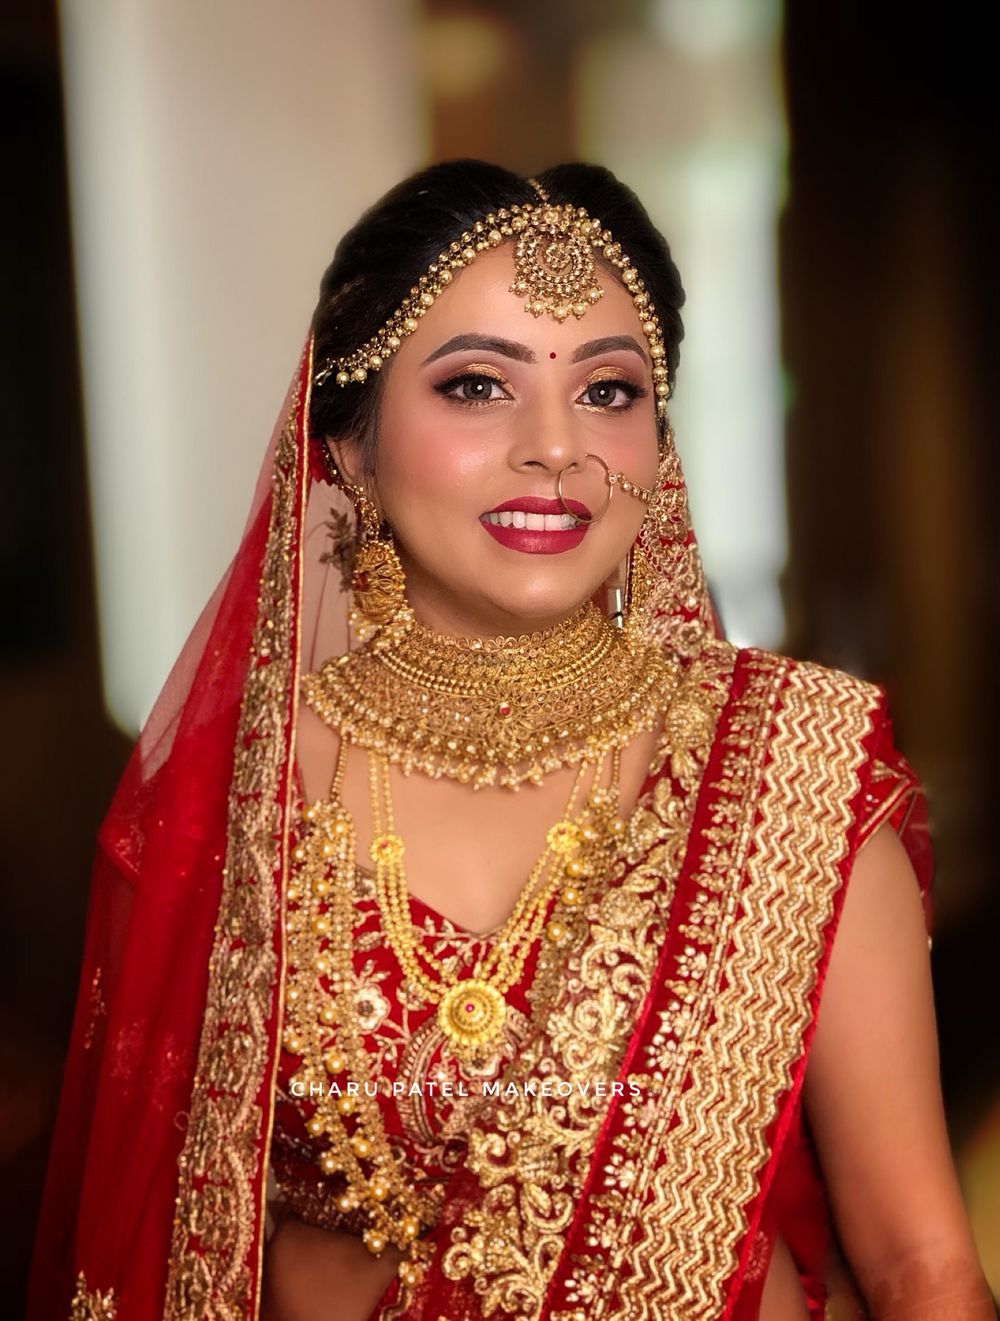 Photo From Sujata  - By Charu Patel’s Professional Makeup